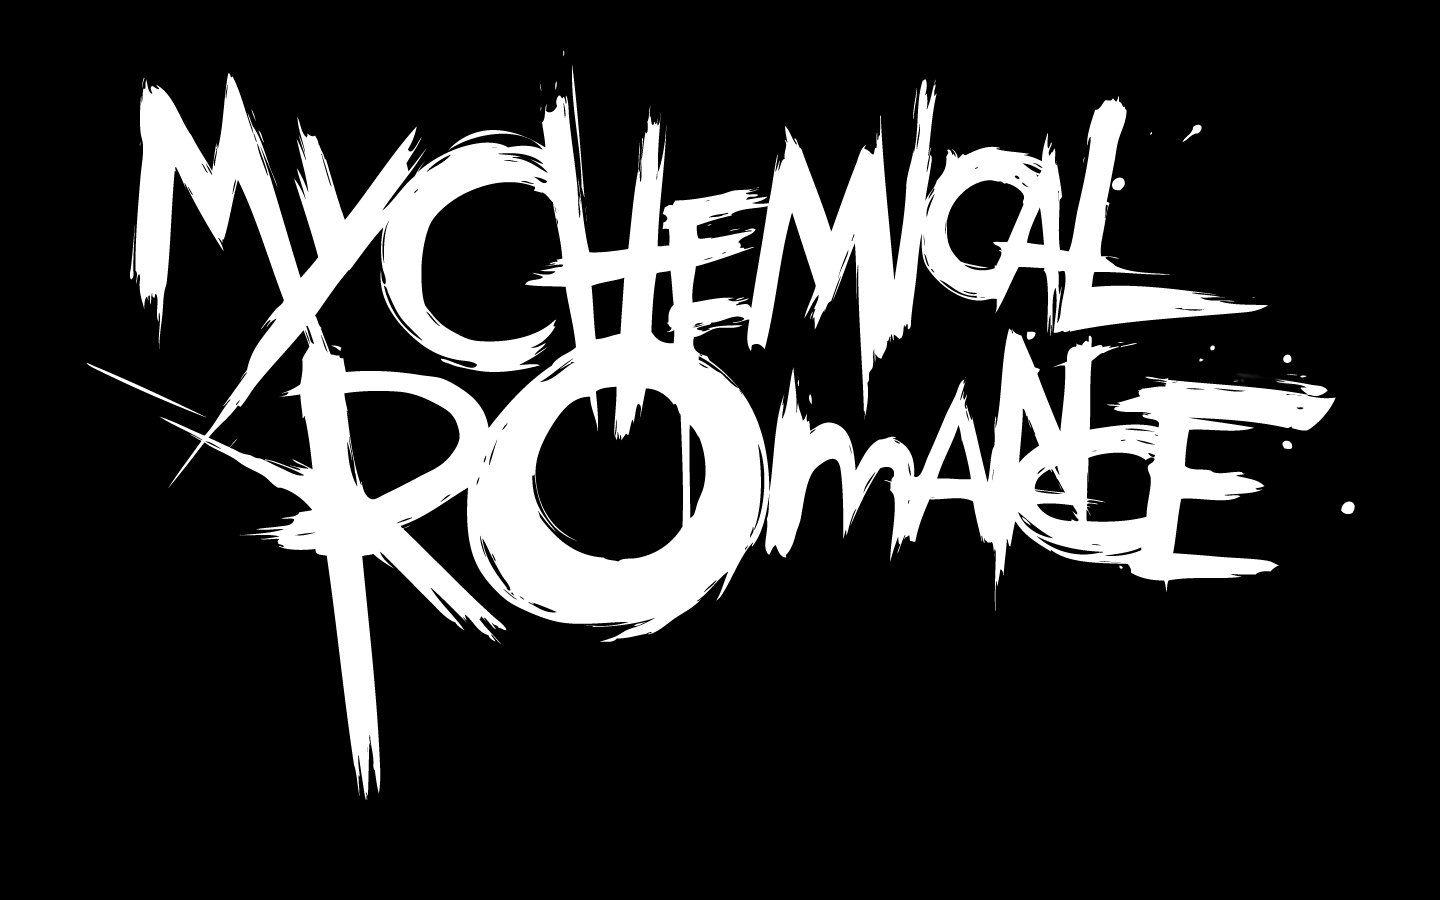 My Chemical Romance Aesthetic Wallpapers